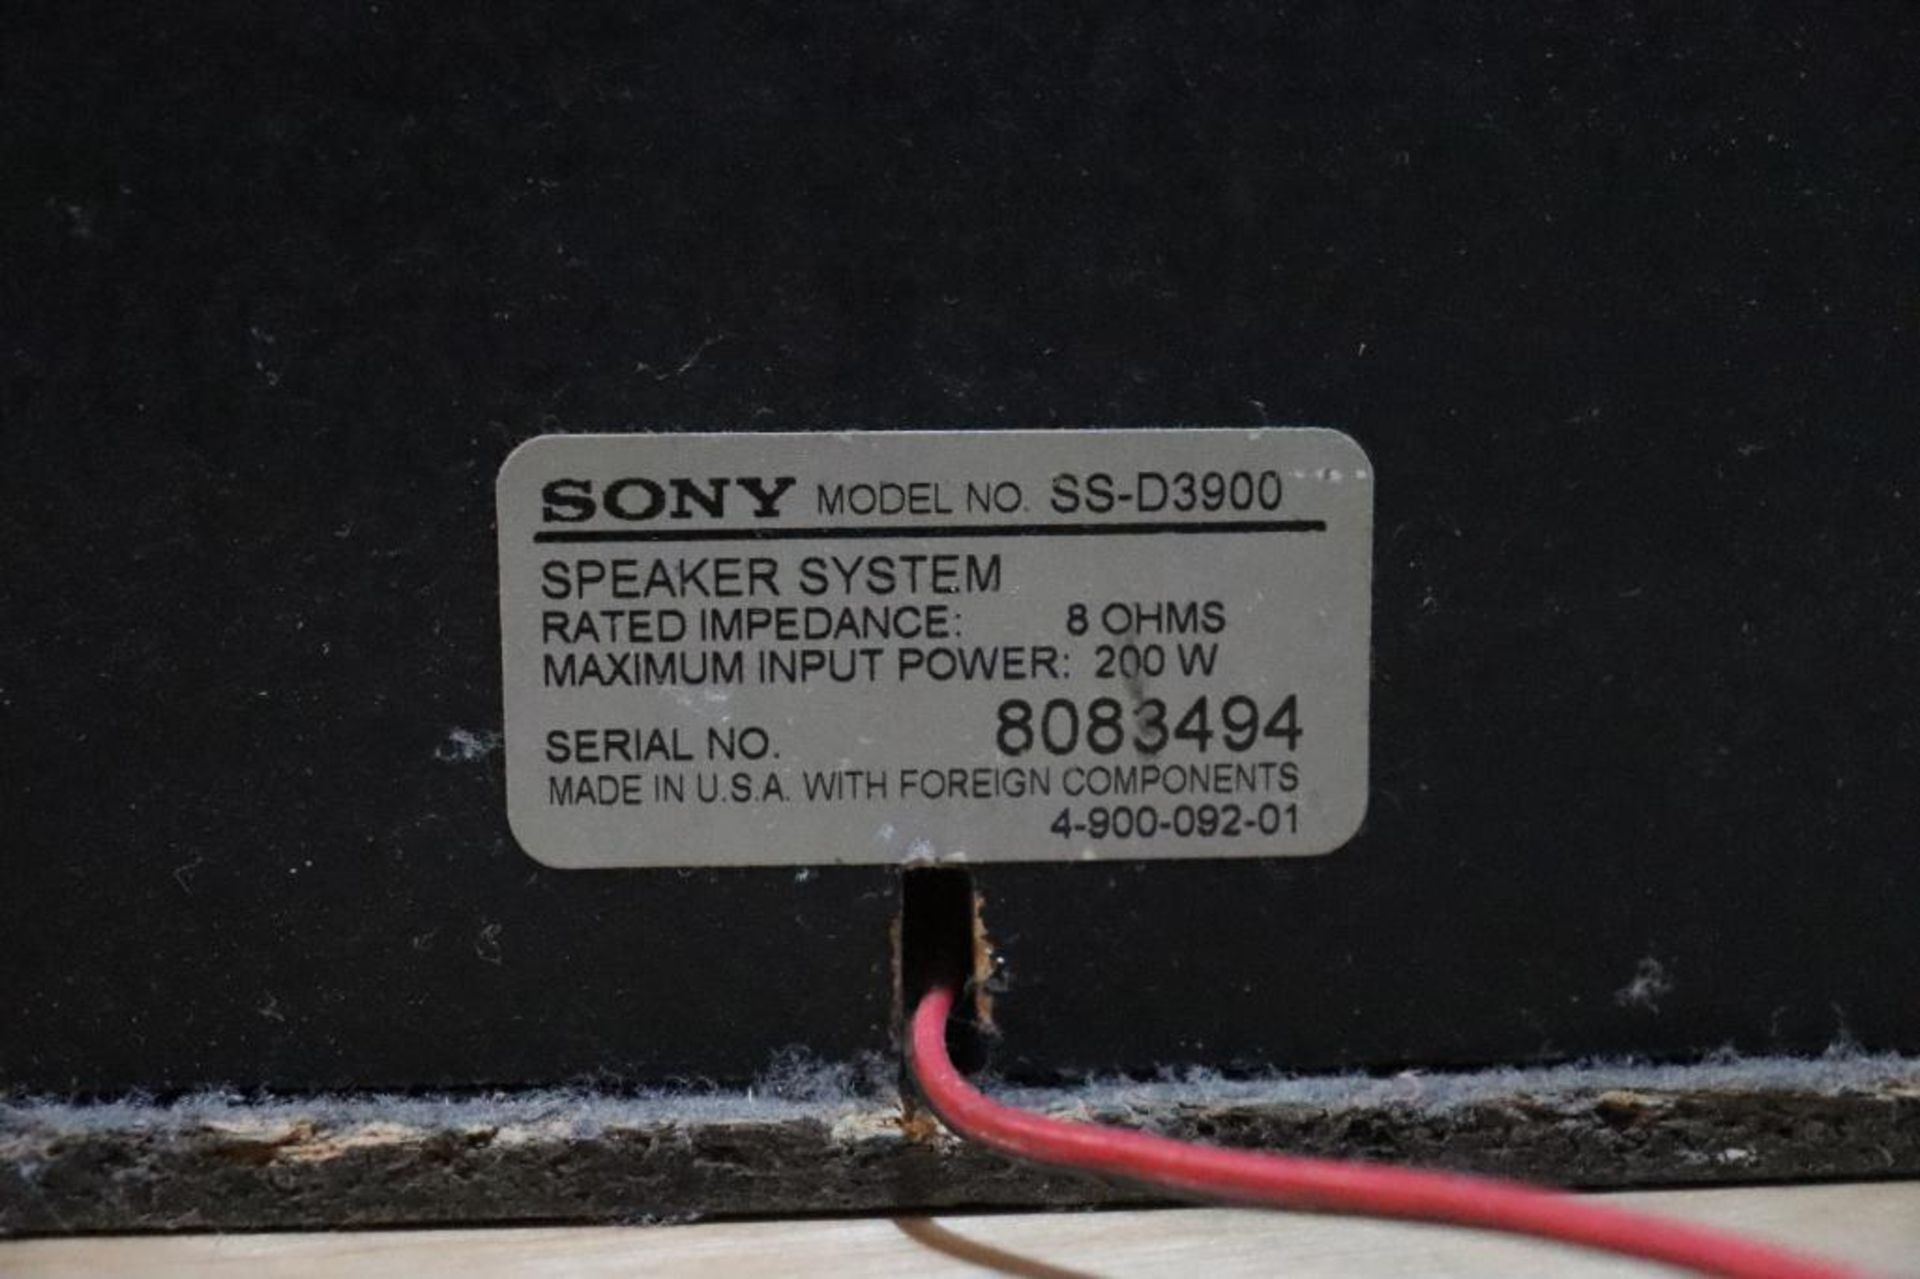 Sony stereo system - Image 5 of 6